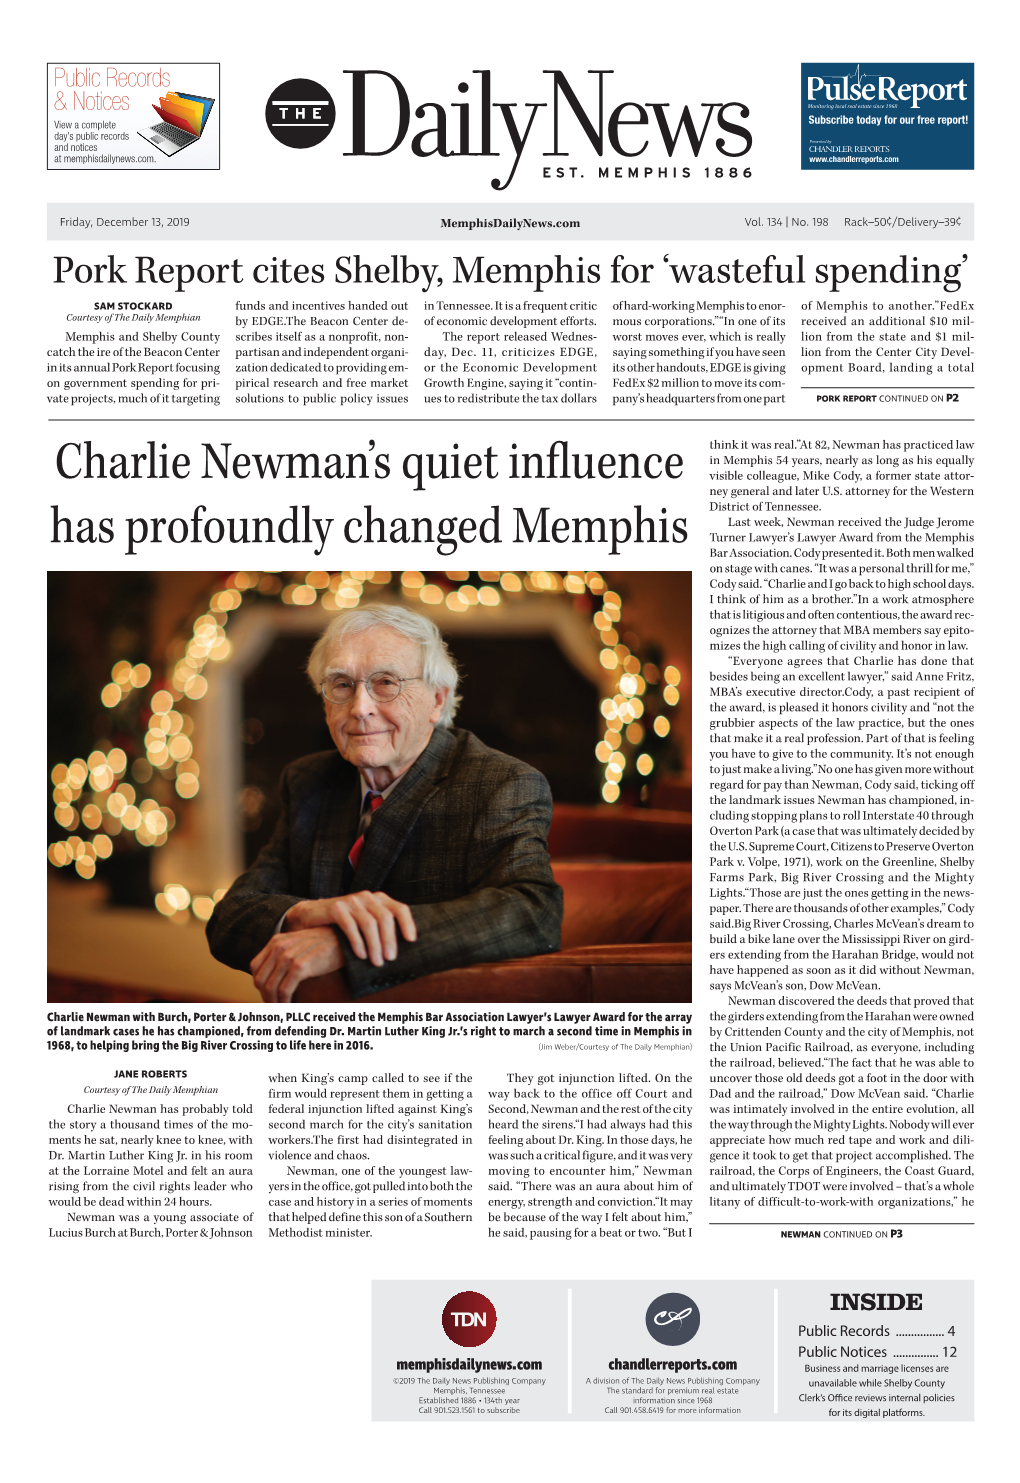 Charlie Newman's Quiet Influence Has Profoundly Changed Memphis